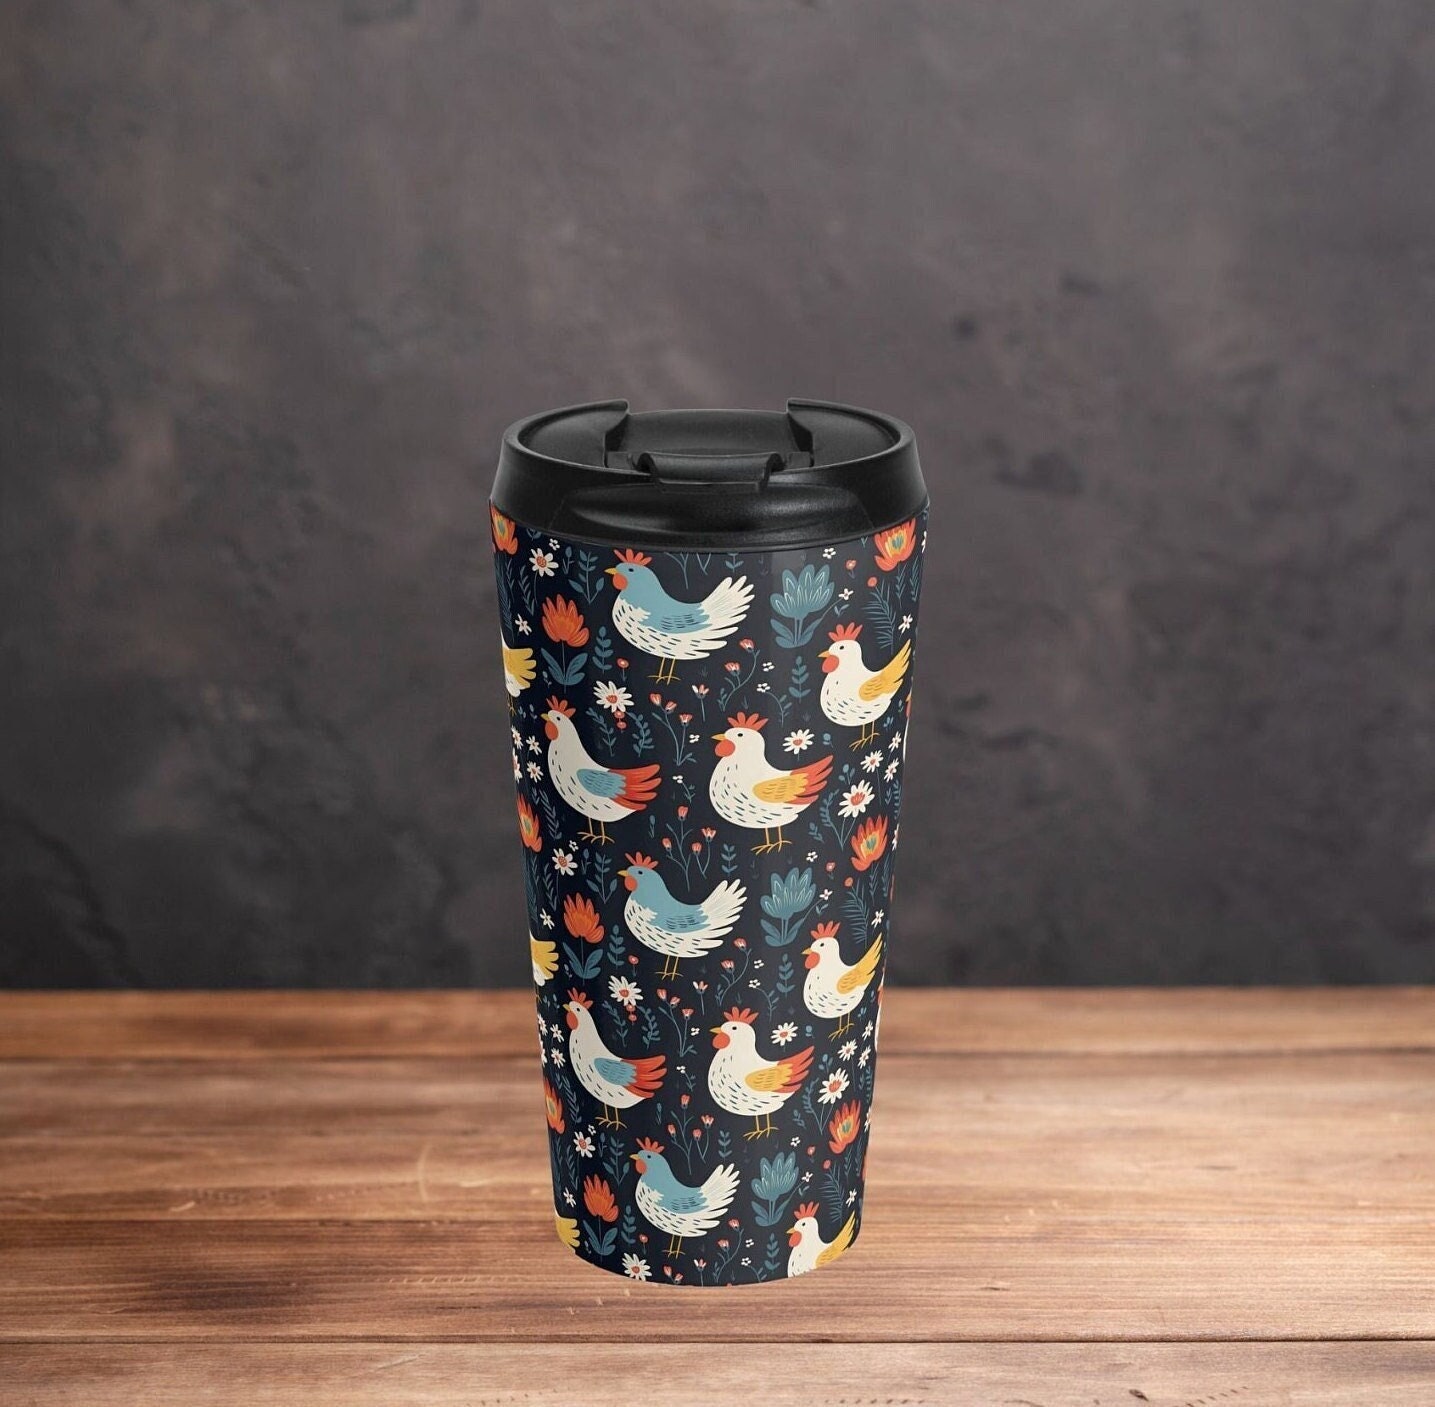 Cute Aesthetic Insulated Travel Coffee Mug with Hand Strap and DIY 3D  Stickers for Women Teen Girls …See more Cute Aesthetic Insulated Travel  Coffee